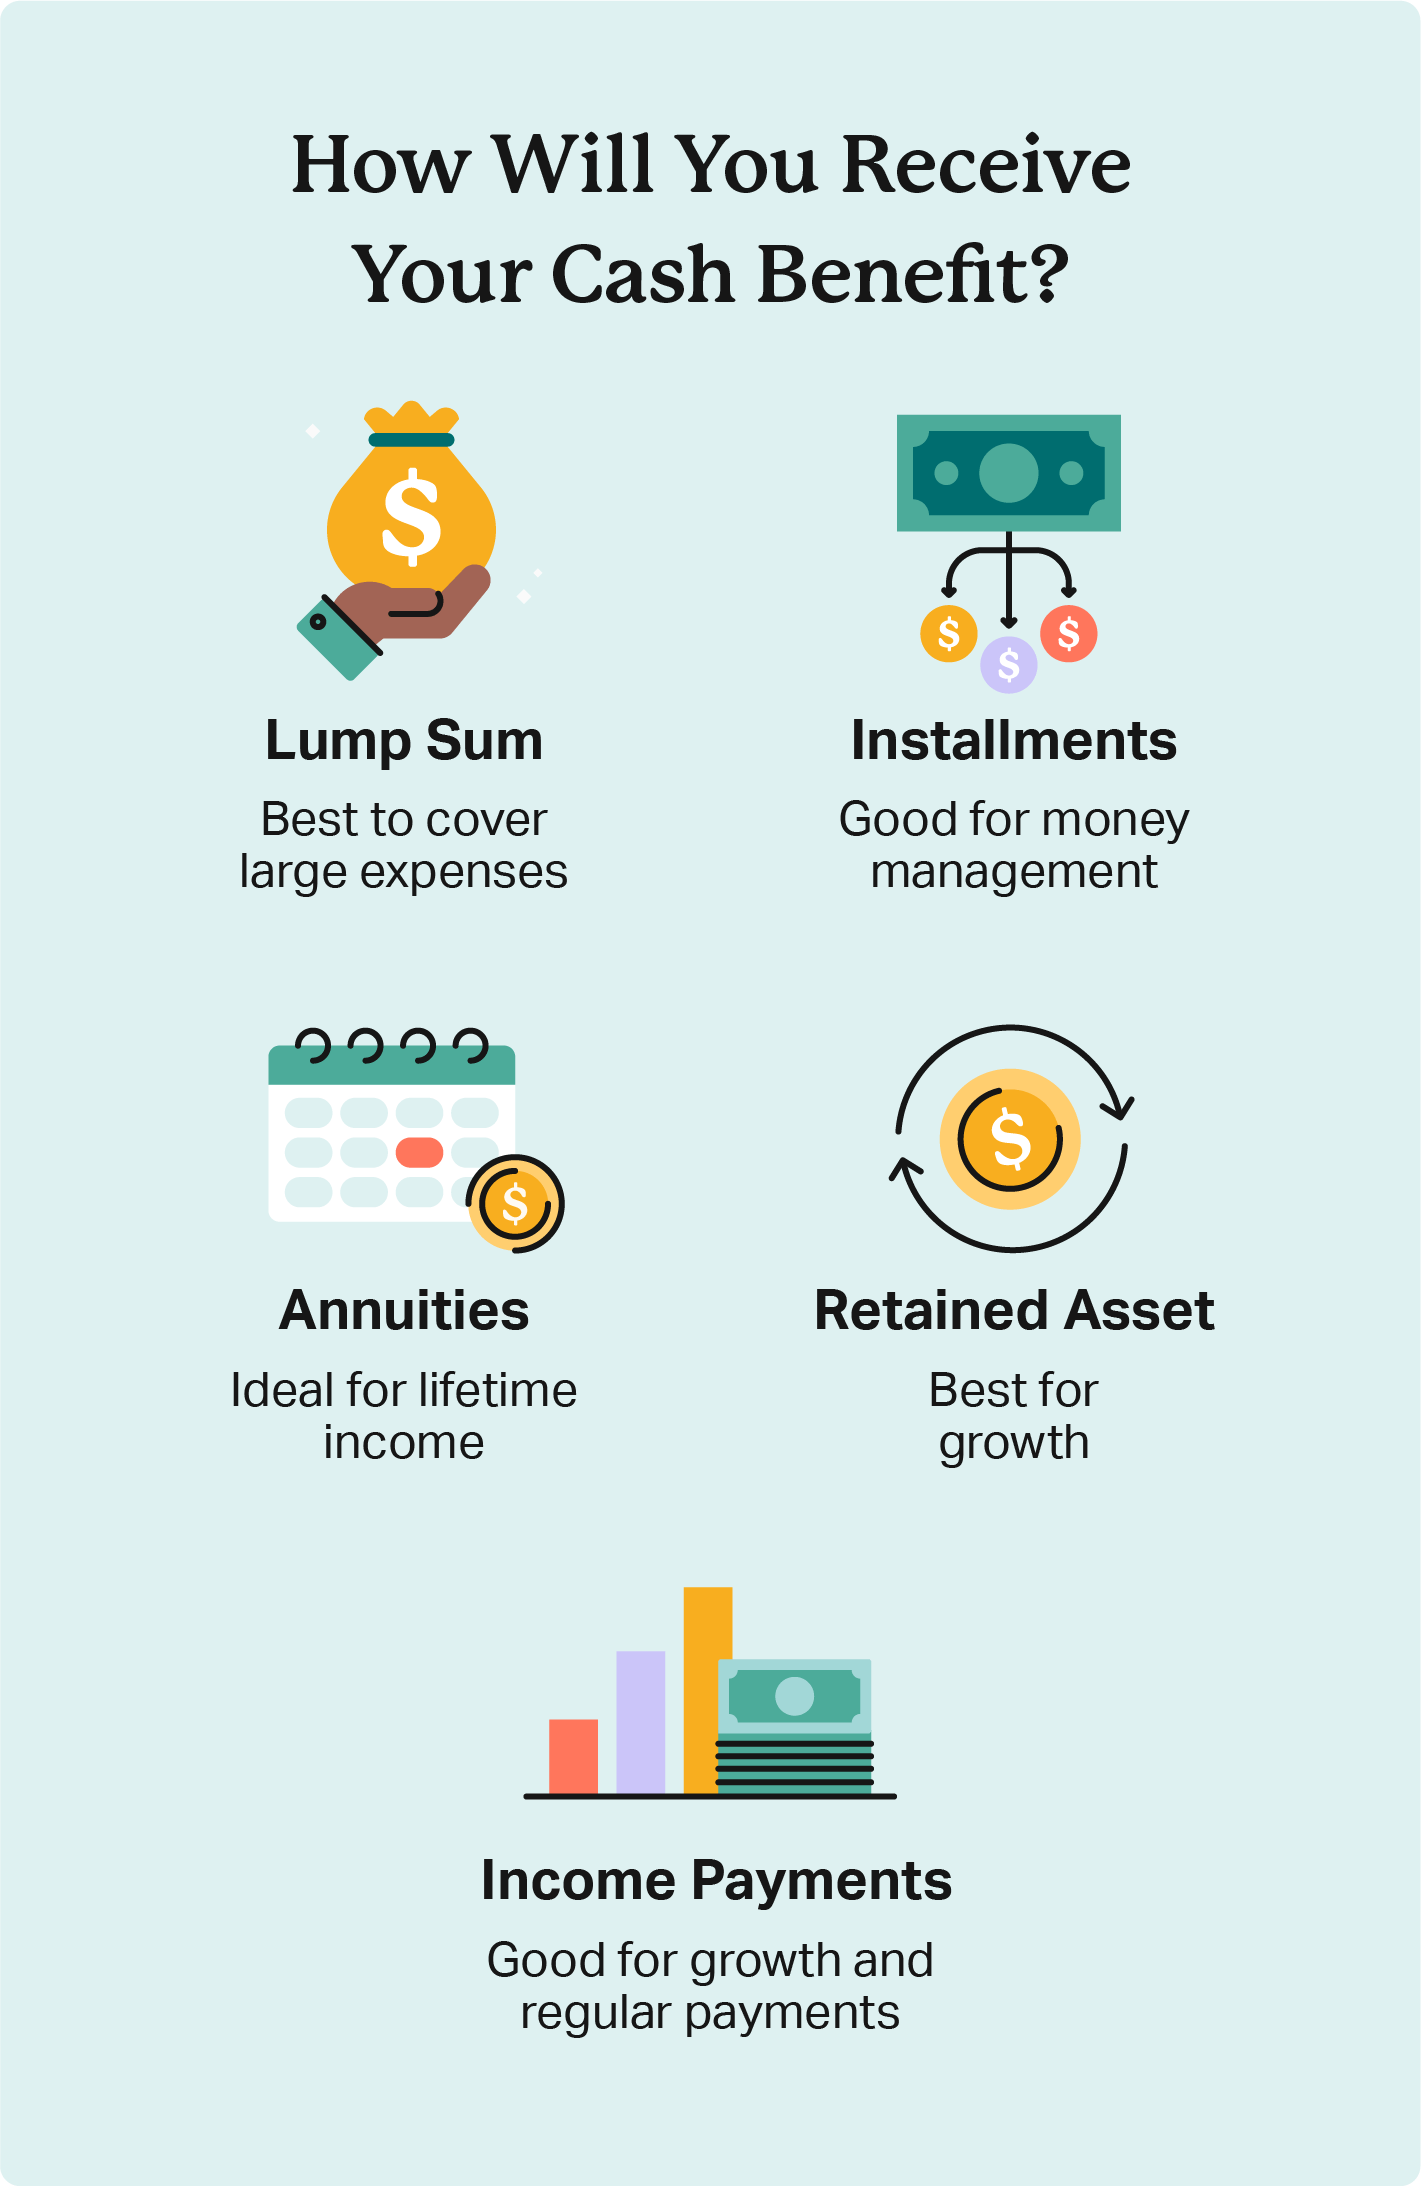 Illustrations explain the five ways benefits are paid, including lump sums, installments, annuities, retained assets, or income payments.